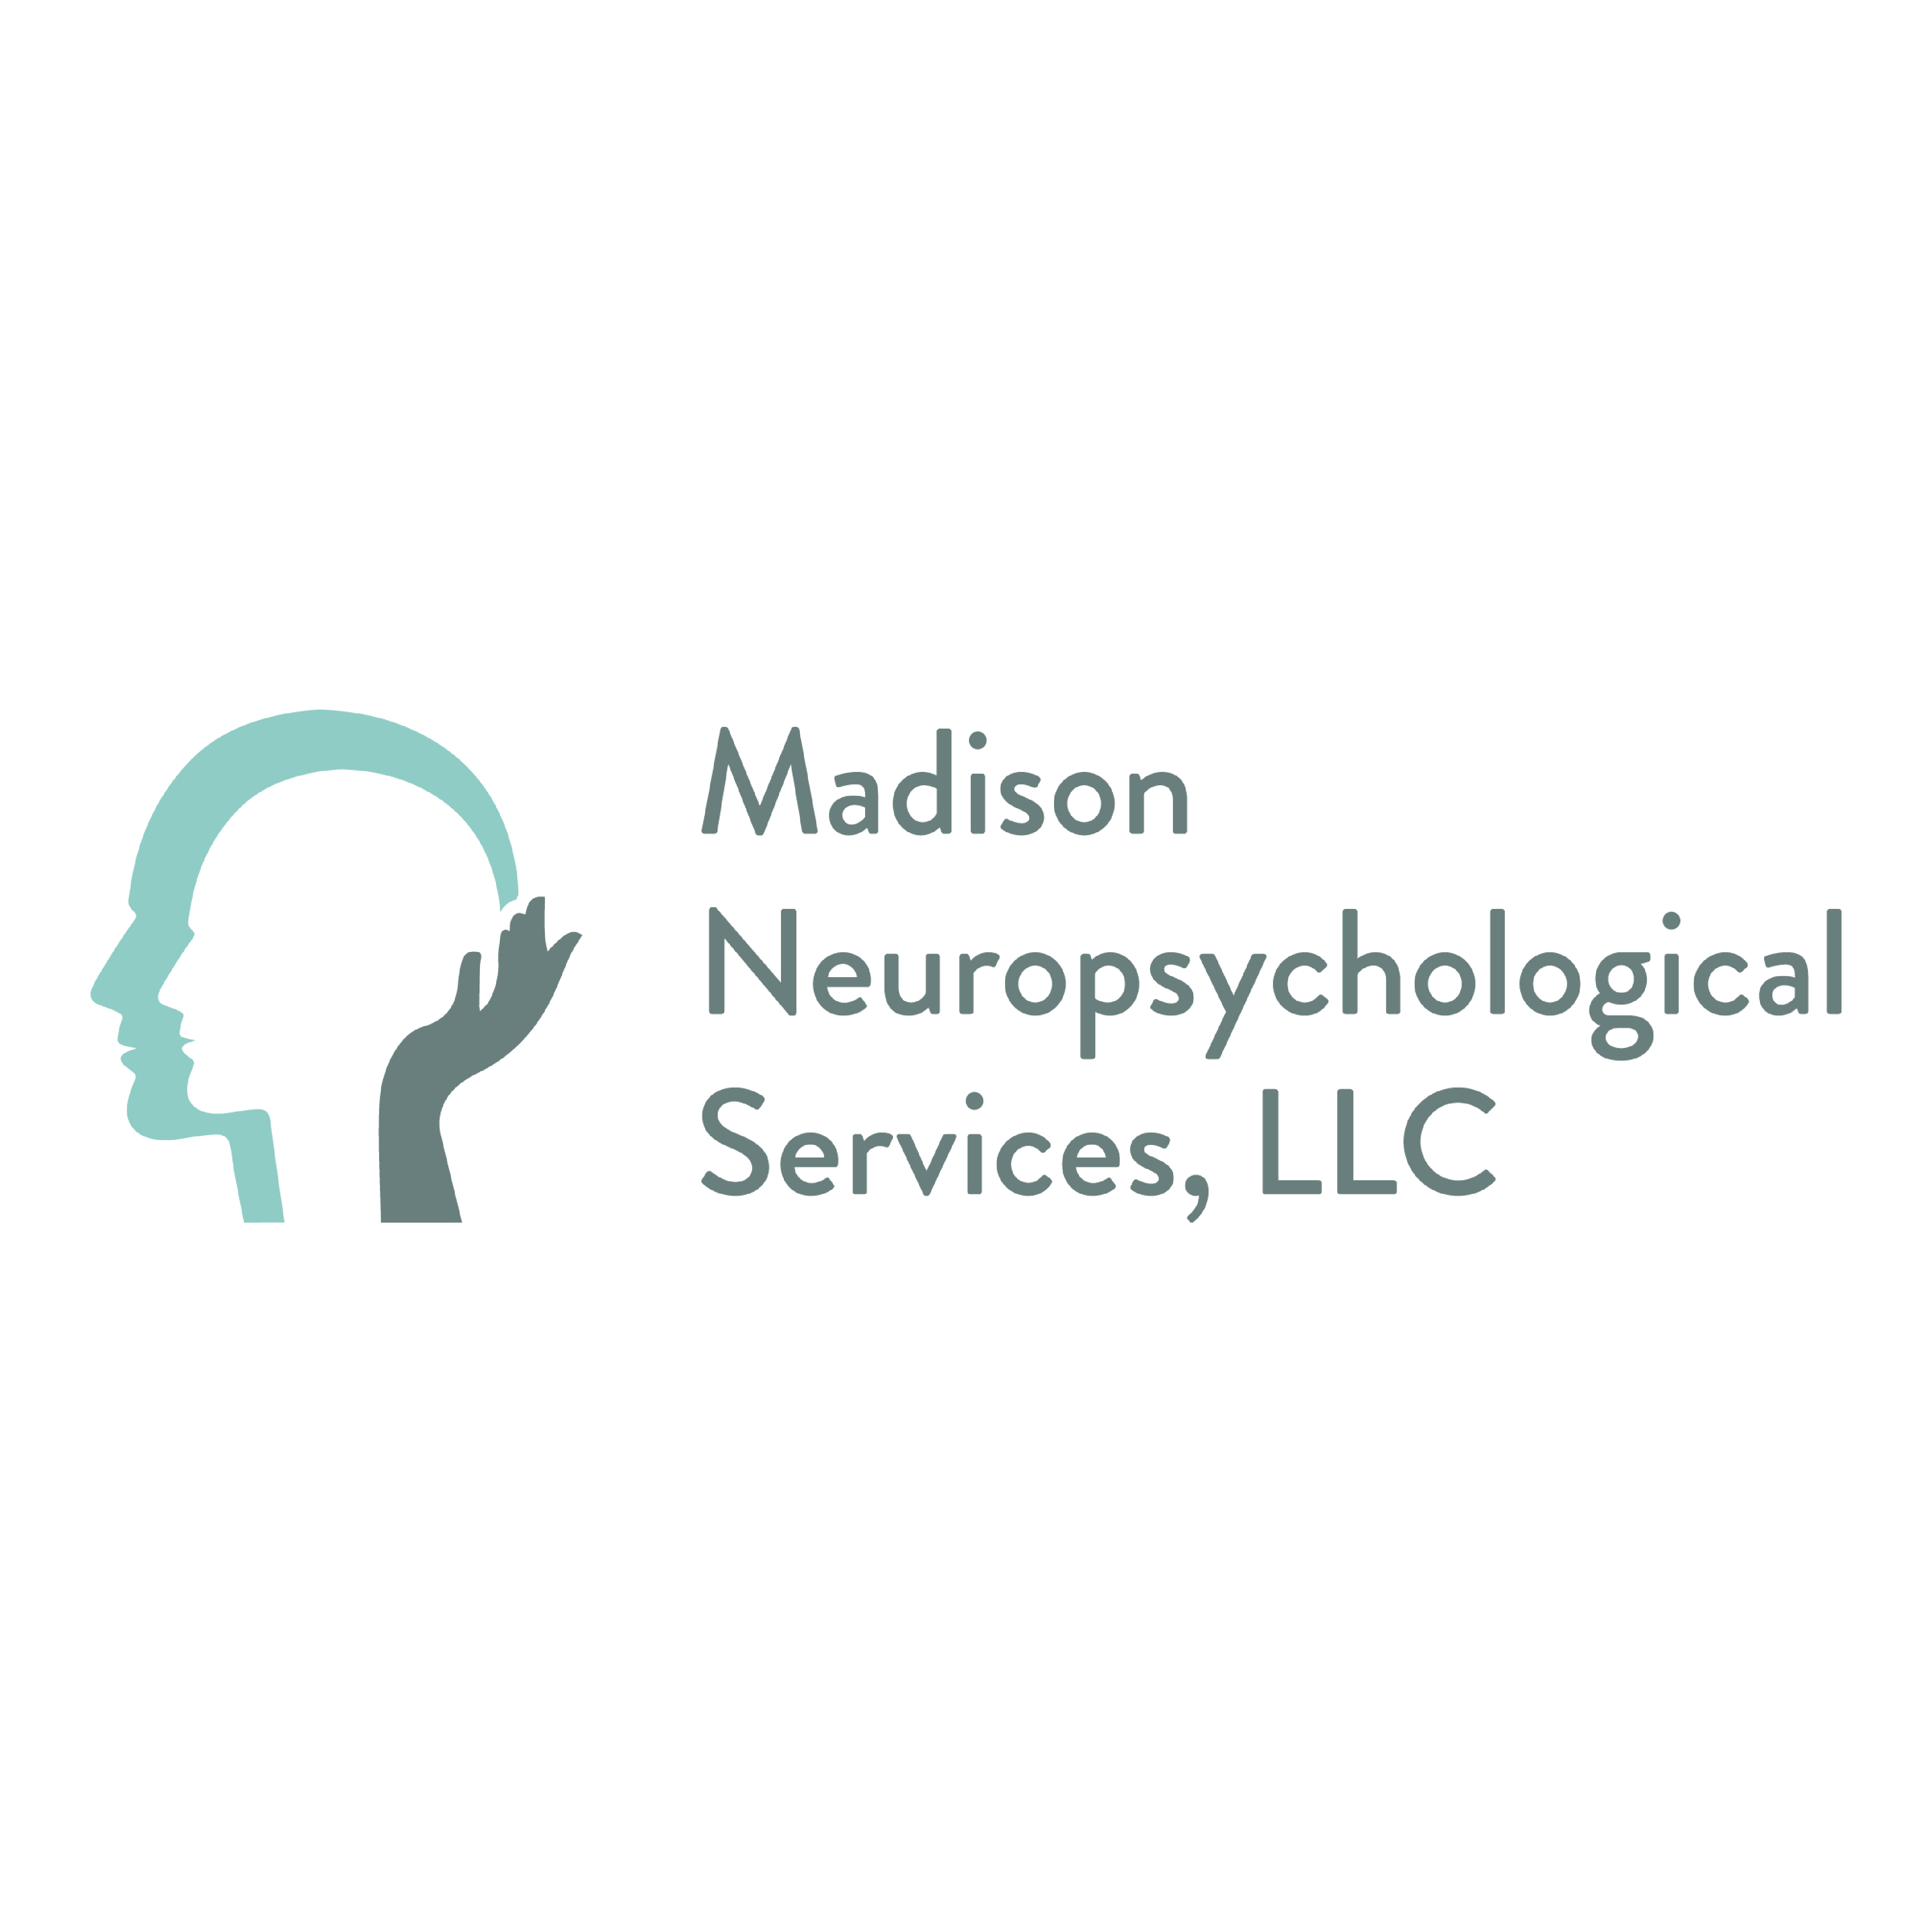 Madison Neuropsychological Services